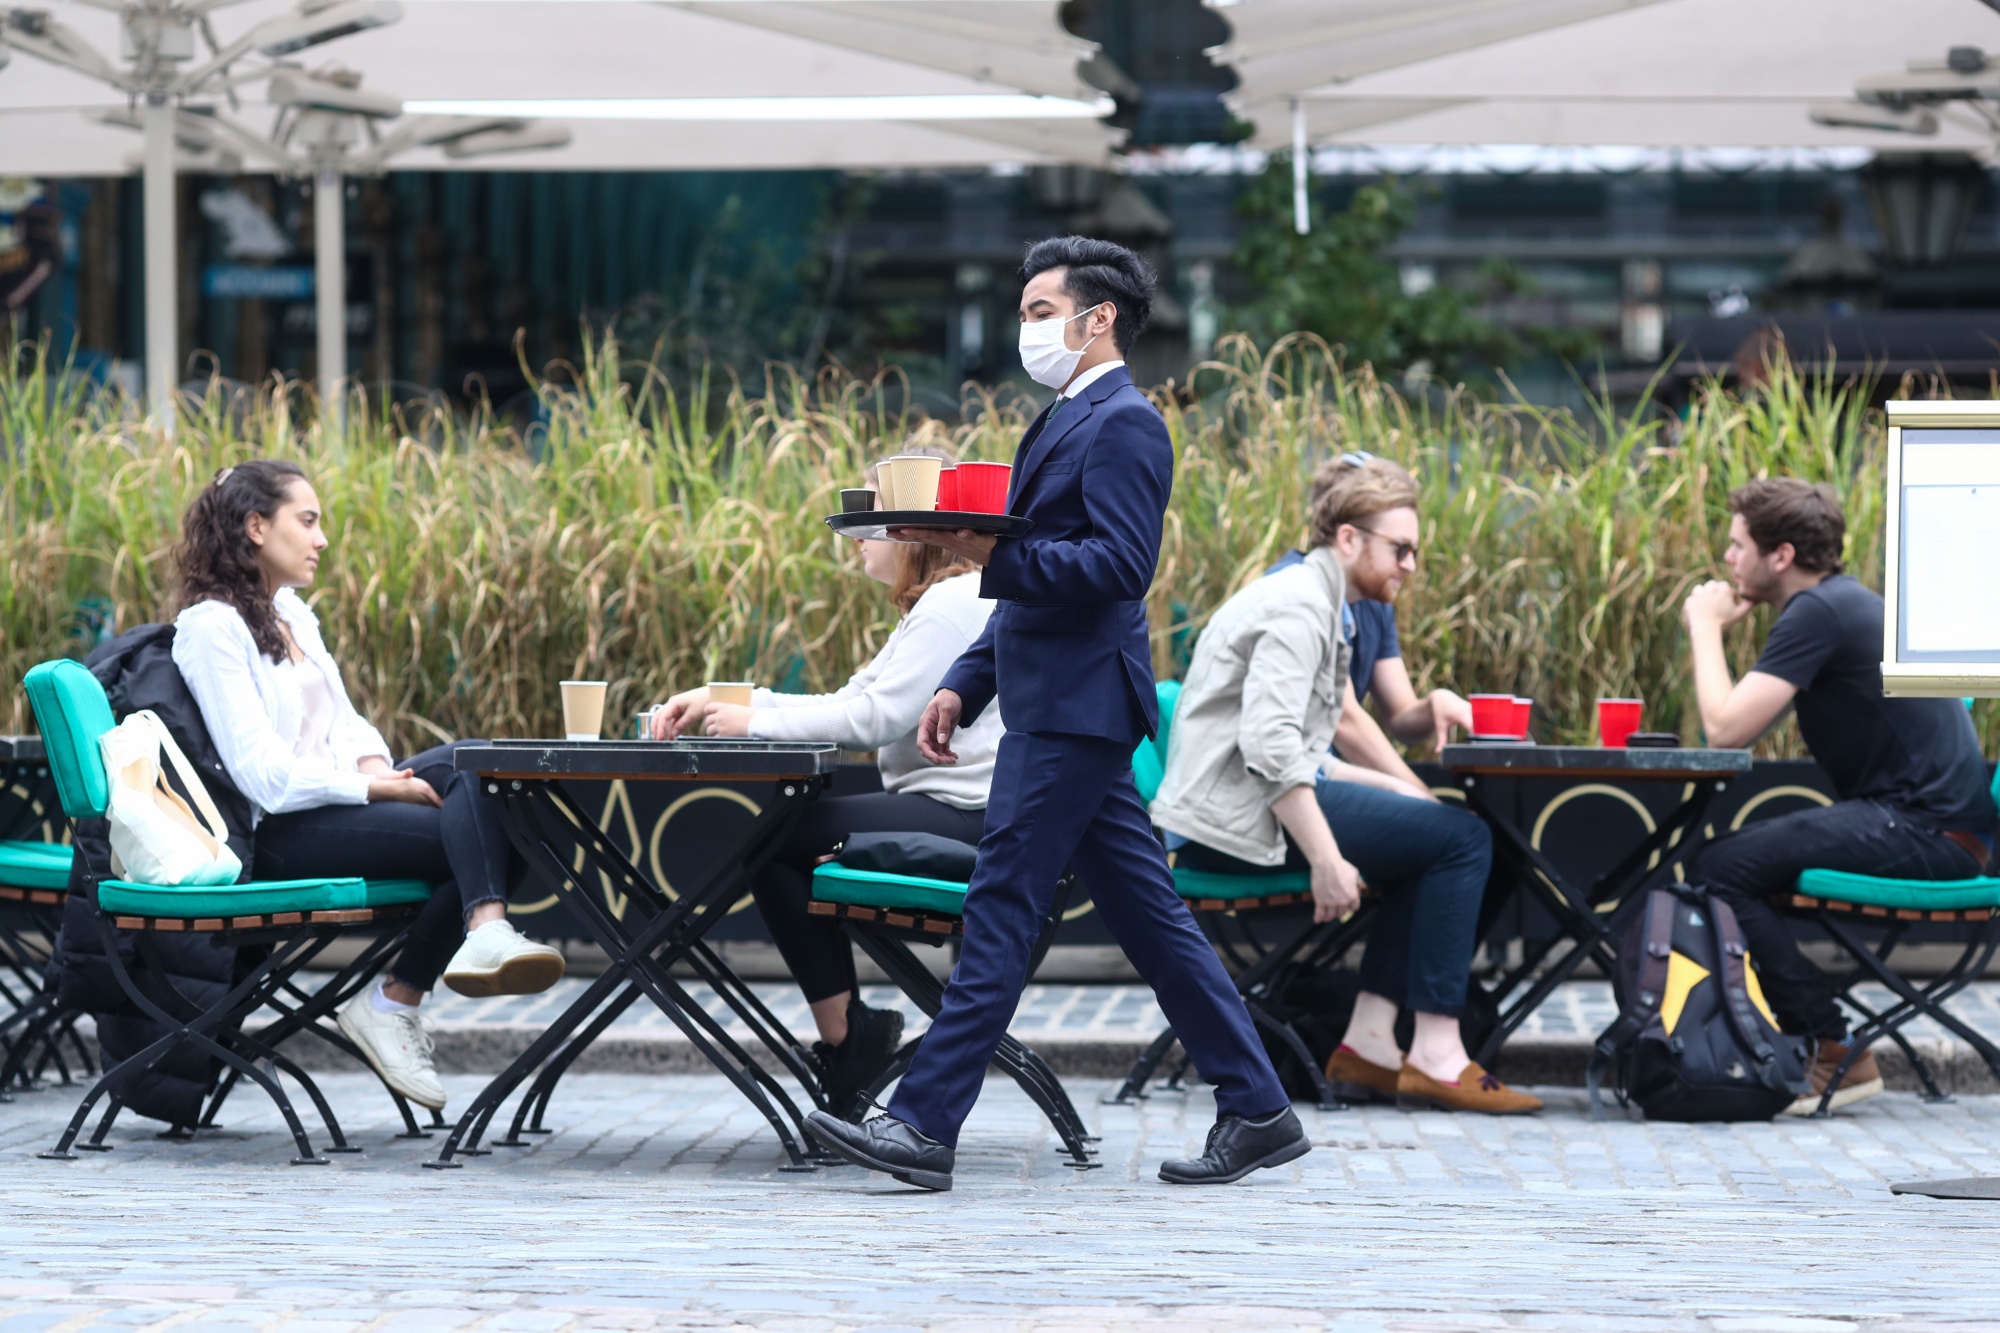 A waiter wearing a protective face mask serves customers sitting at a cafe's terrace in&nbsp;London.